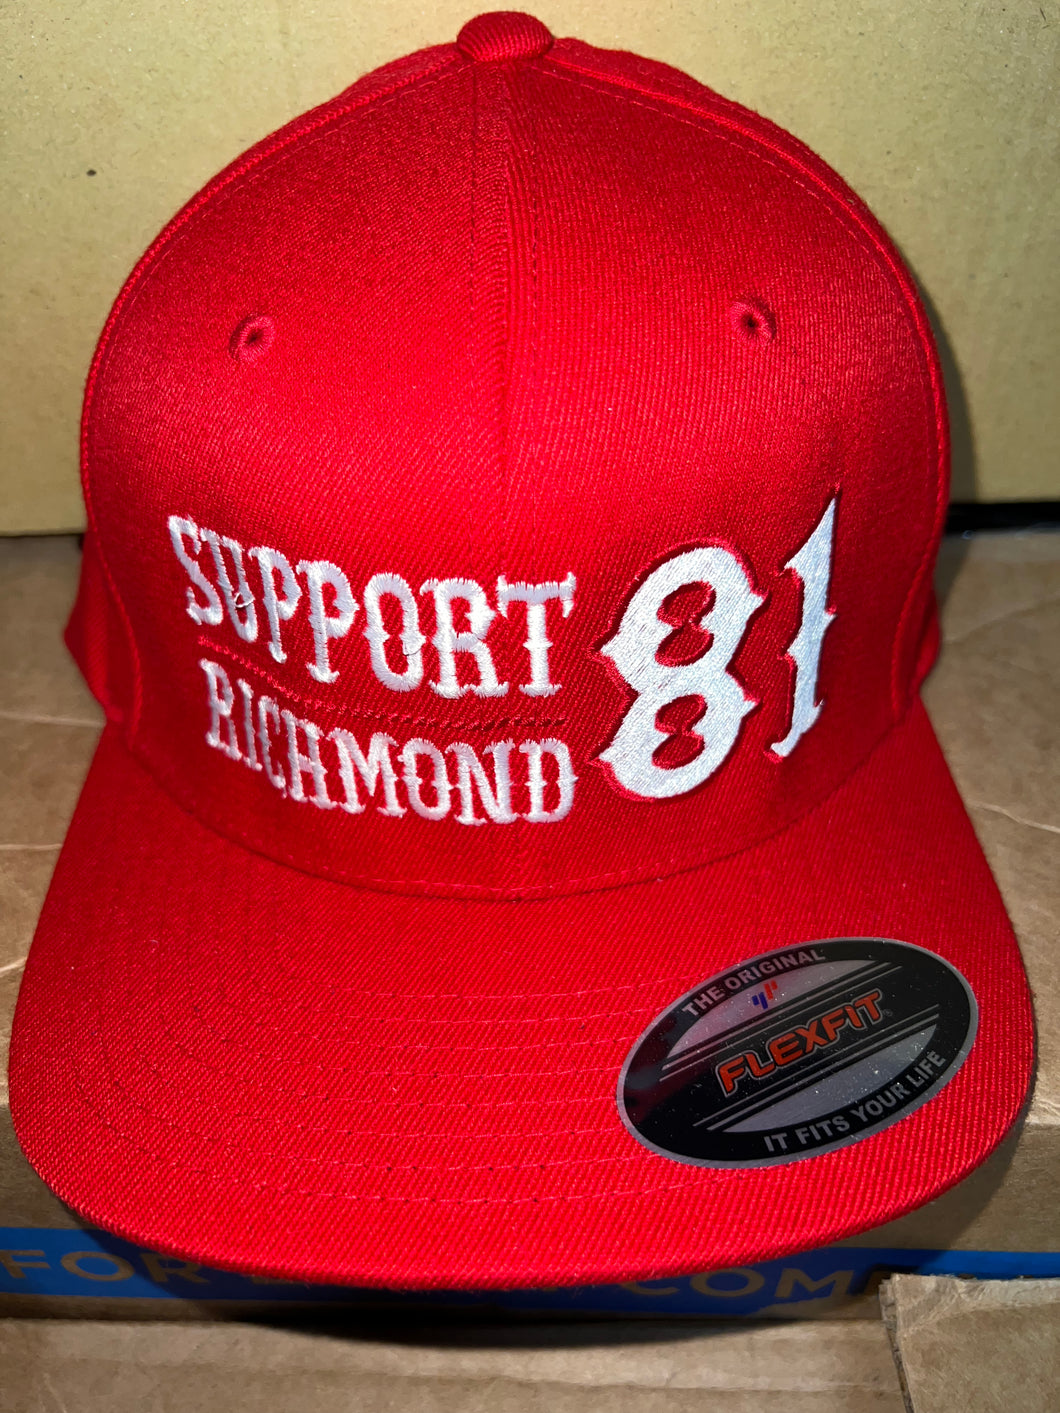 Red flex fit hat with white writing